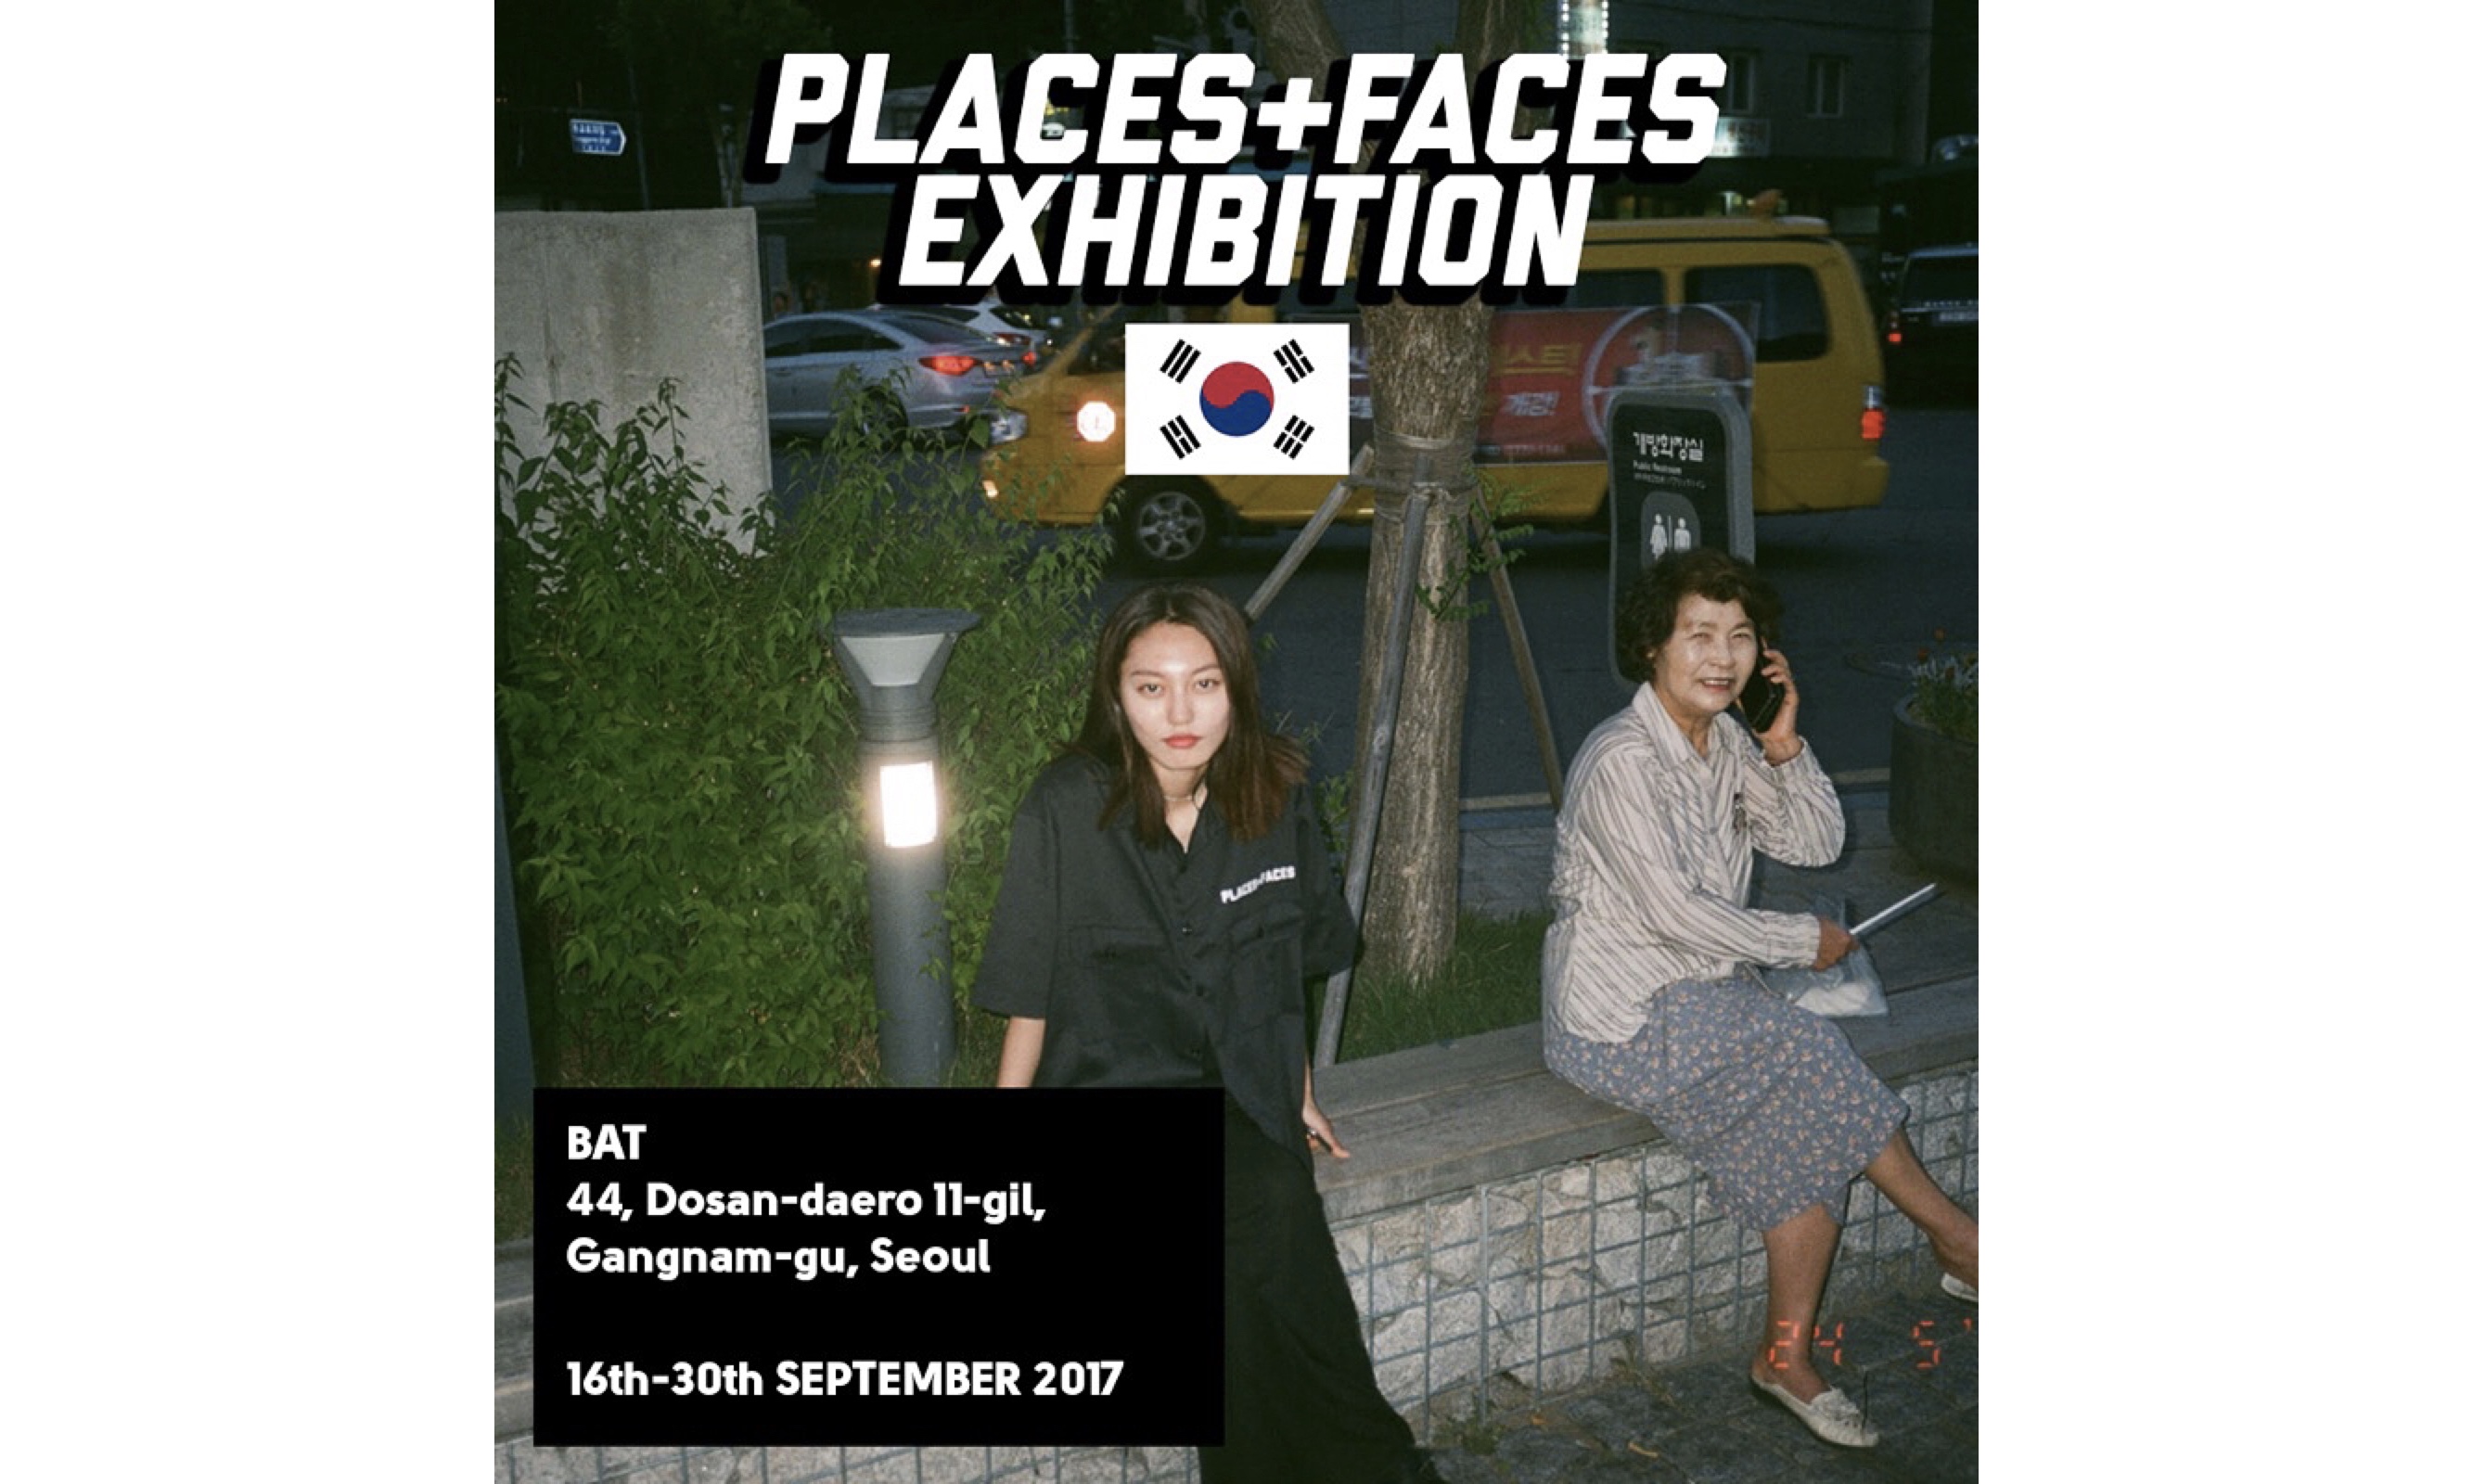 Places+Faces Exhibition 期间限定店登陆韩国